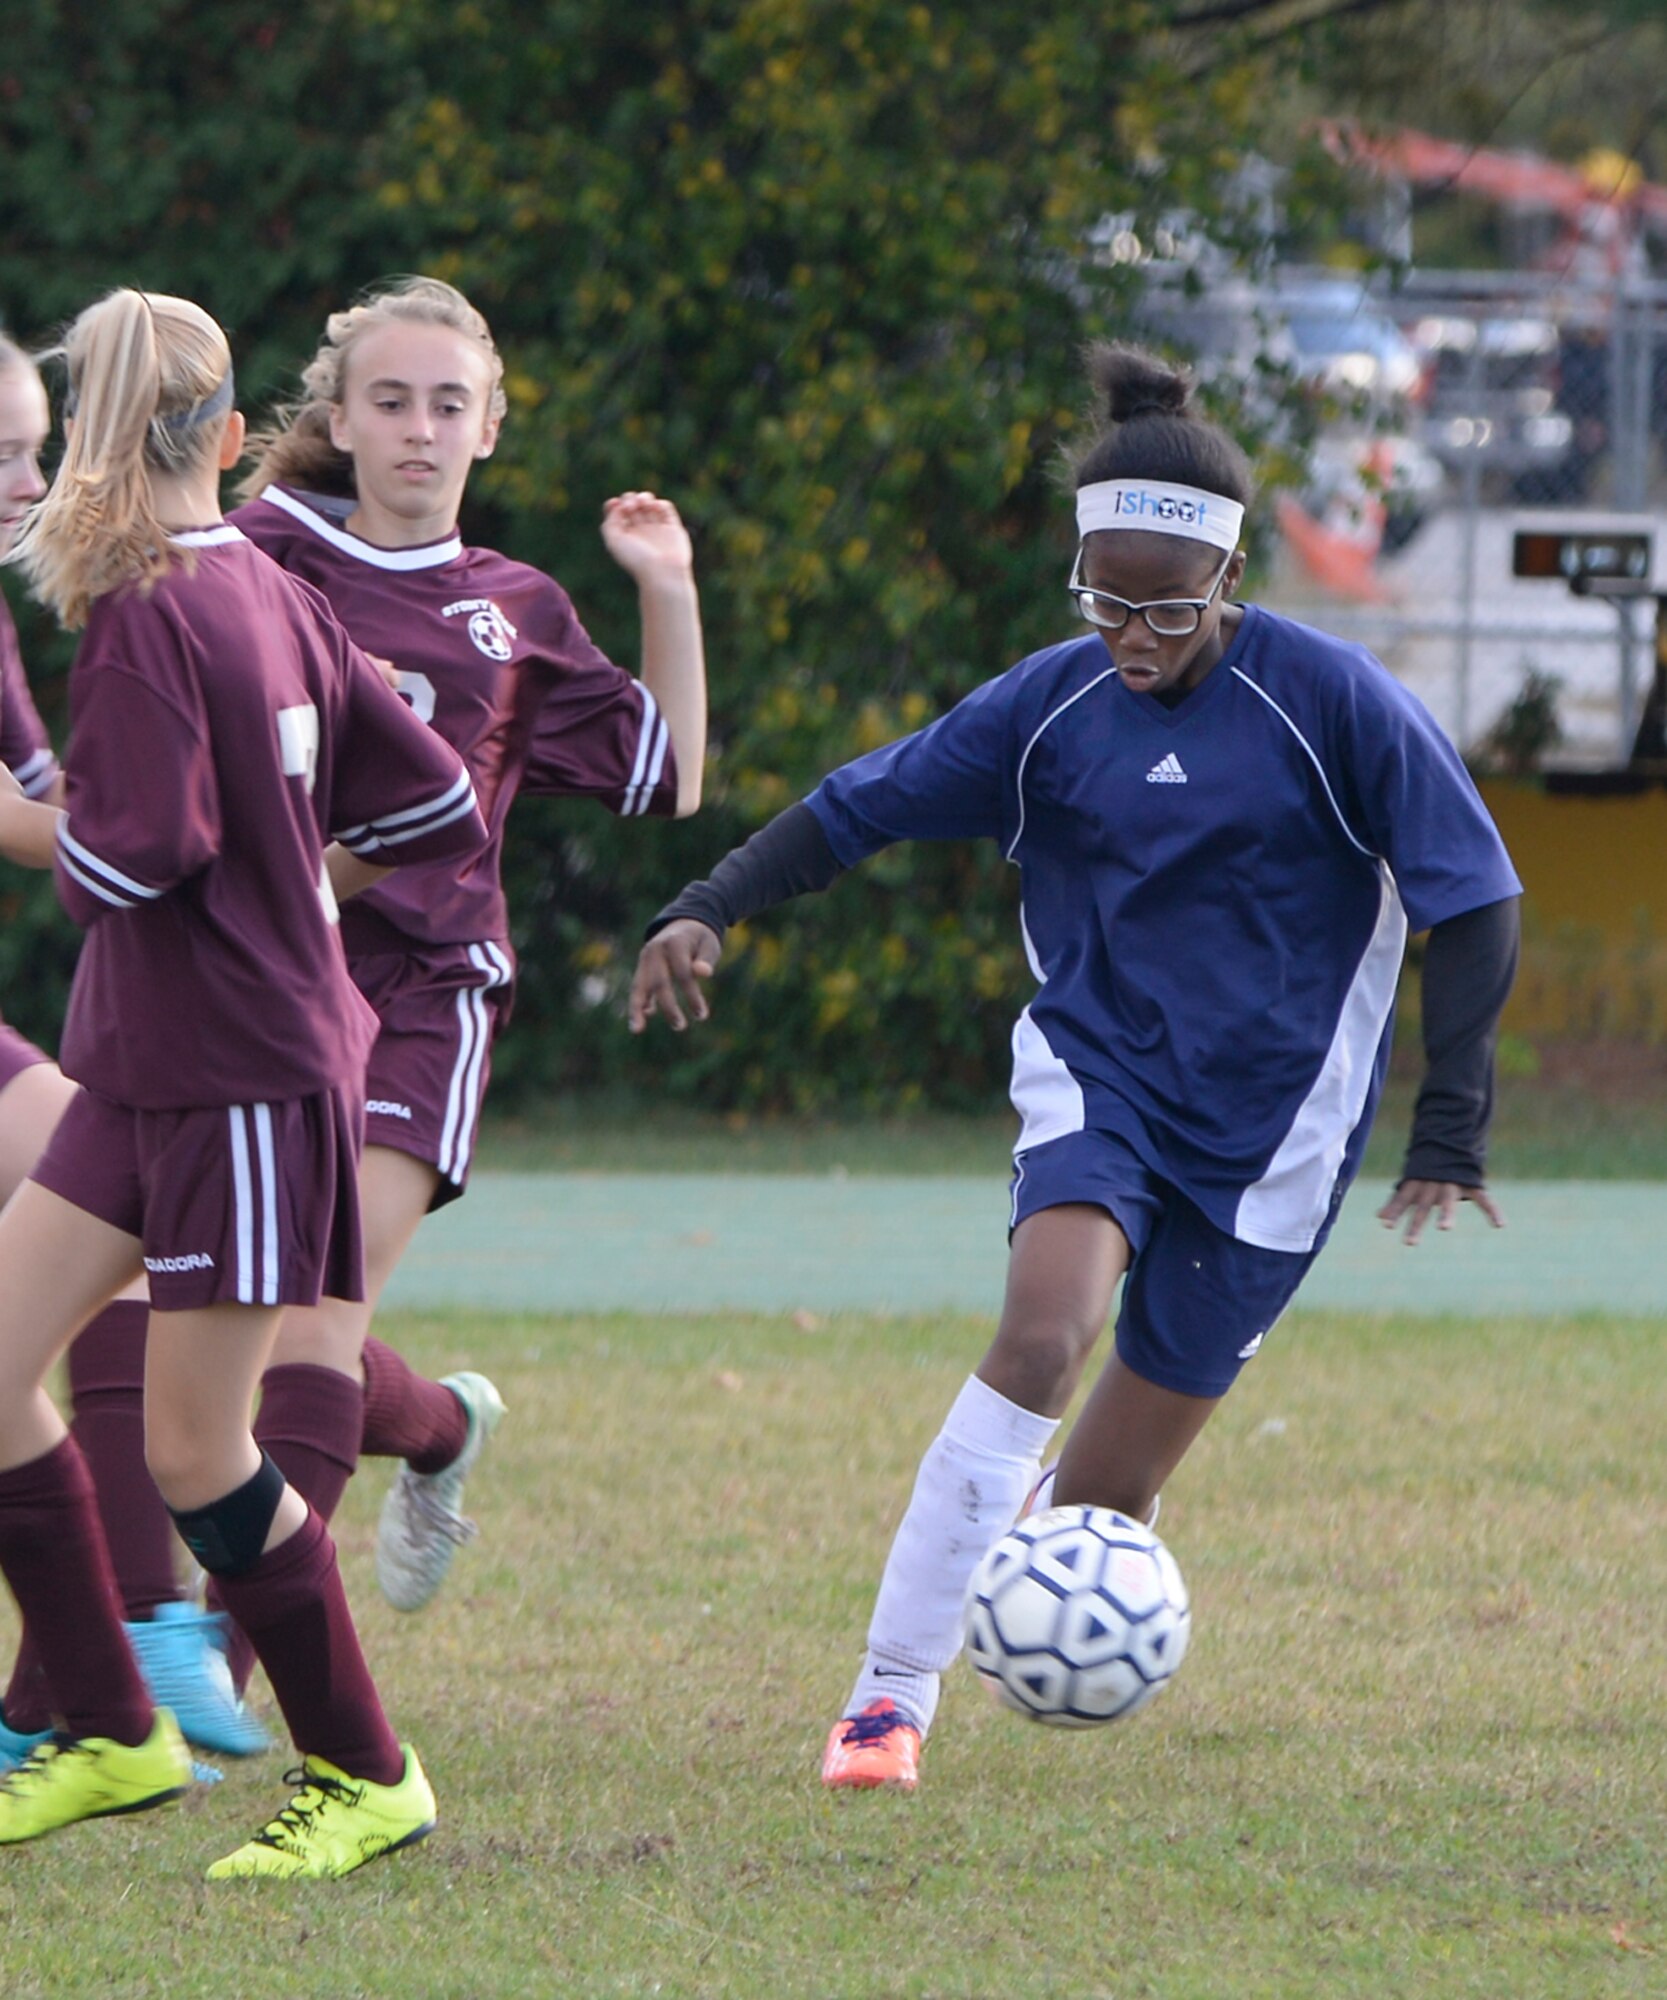 Marcia Green-Williams, right, a member of the Hanscom Middle School Falcons girls’ soccer team, dribbles the ball during a home match against the Westford Middle School team at the base track Oct. 14. The Hanscom Middle School team lost the game by a score of 4 to 0. (U.S. Air Force photo by Mark Wyatt)